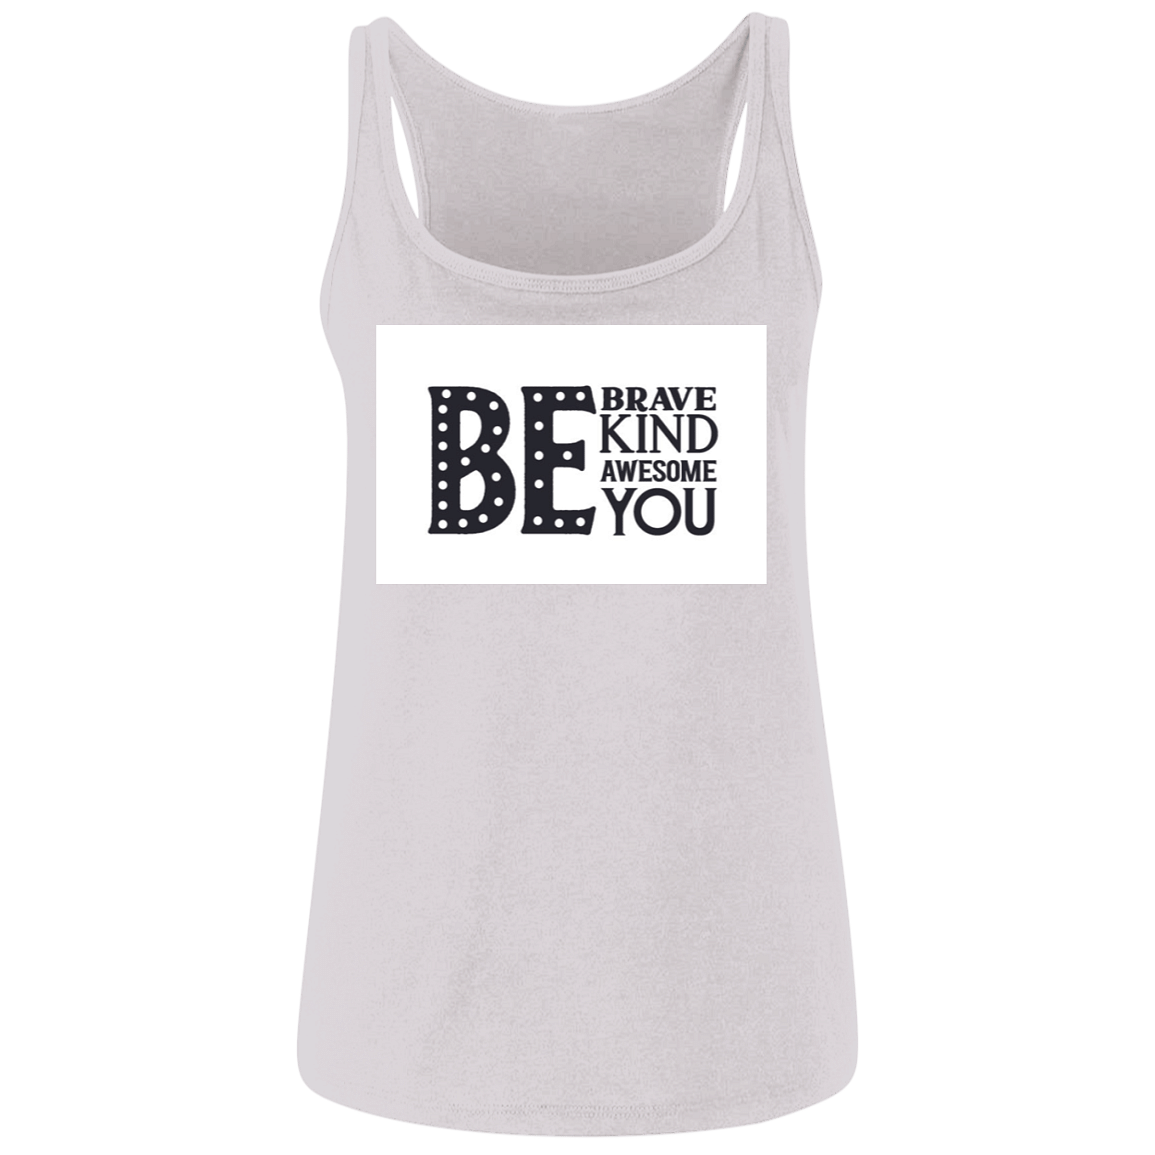 6488 Ladies' Relaxed Jersey Tank